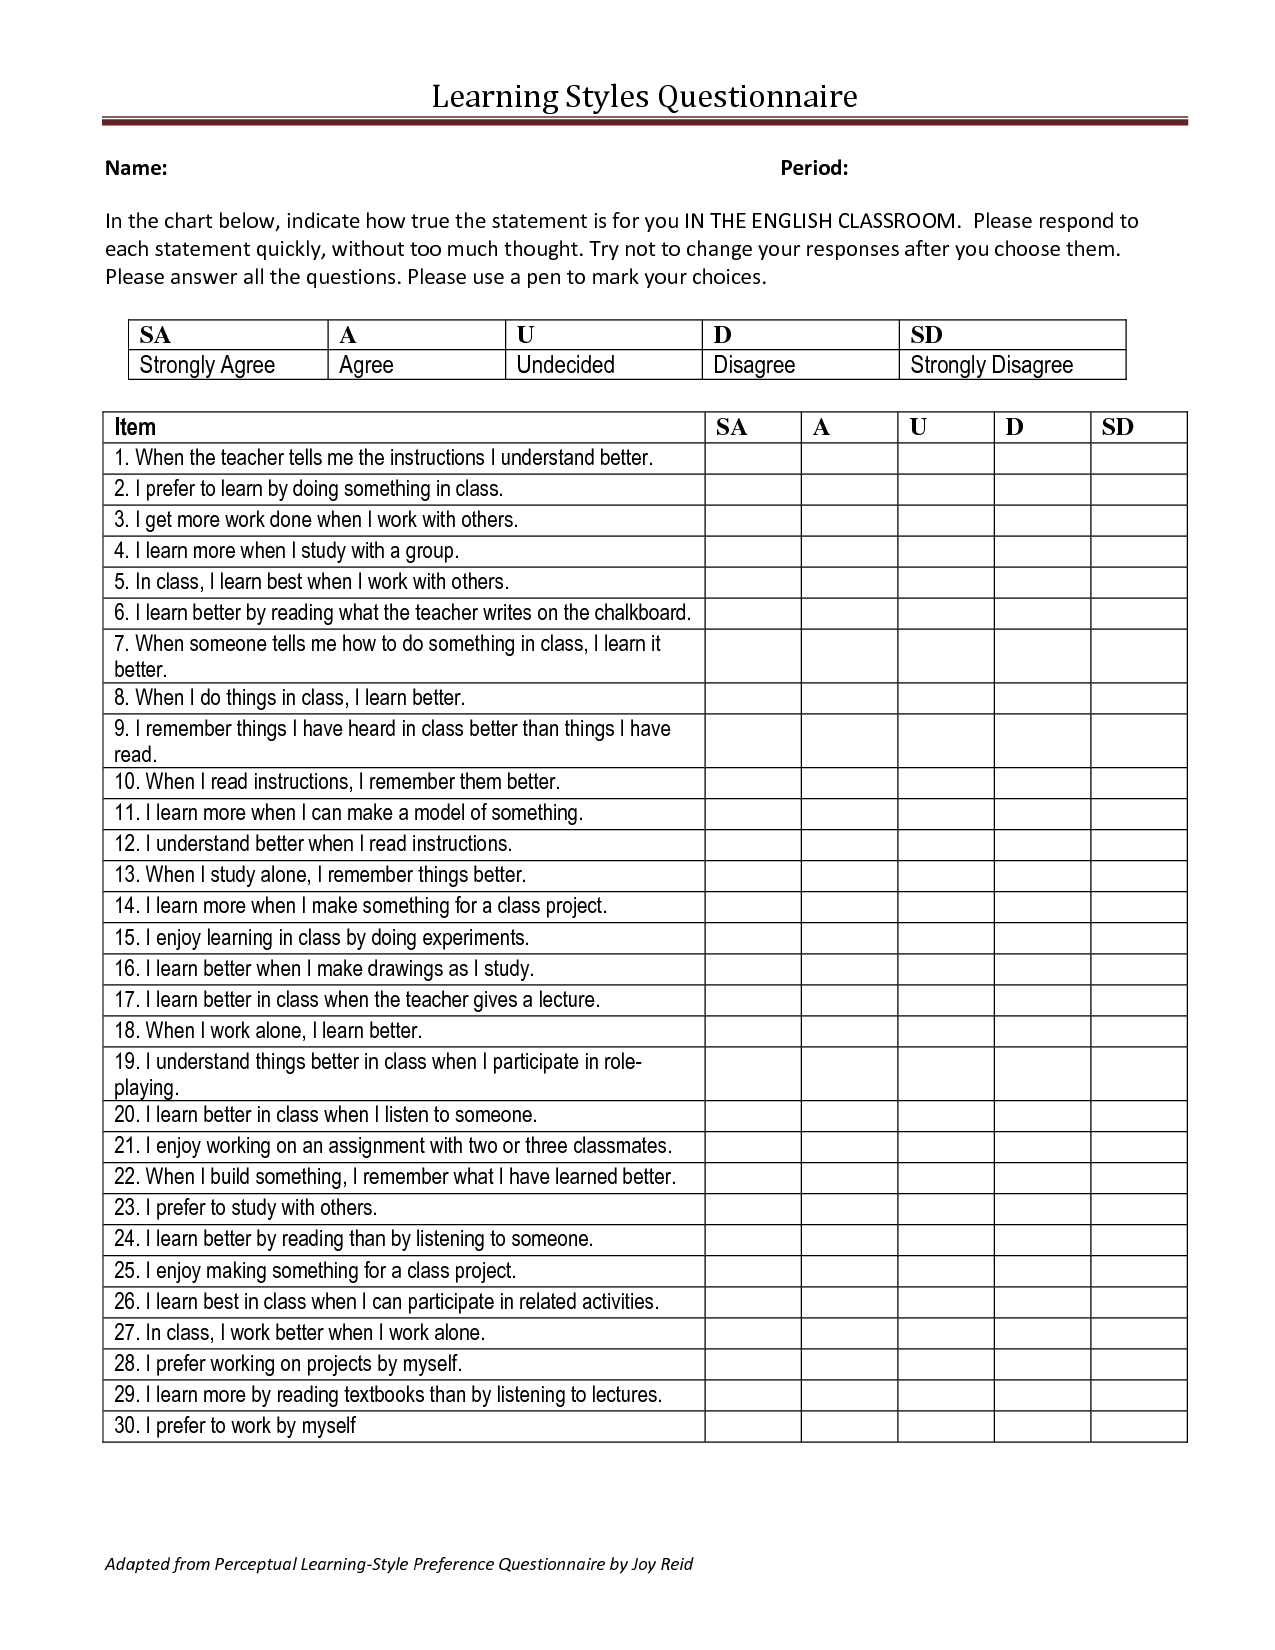 Learning Style Questionnaire | Back To School | Learning Styles - Free Printable Learning Styles Questionnaire